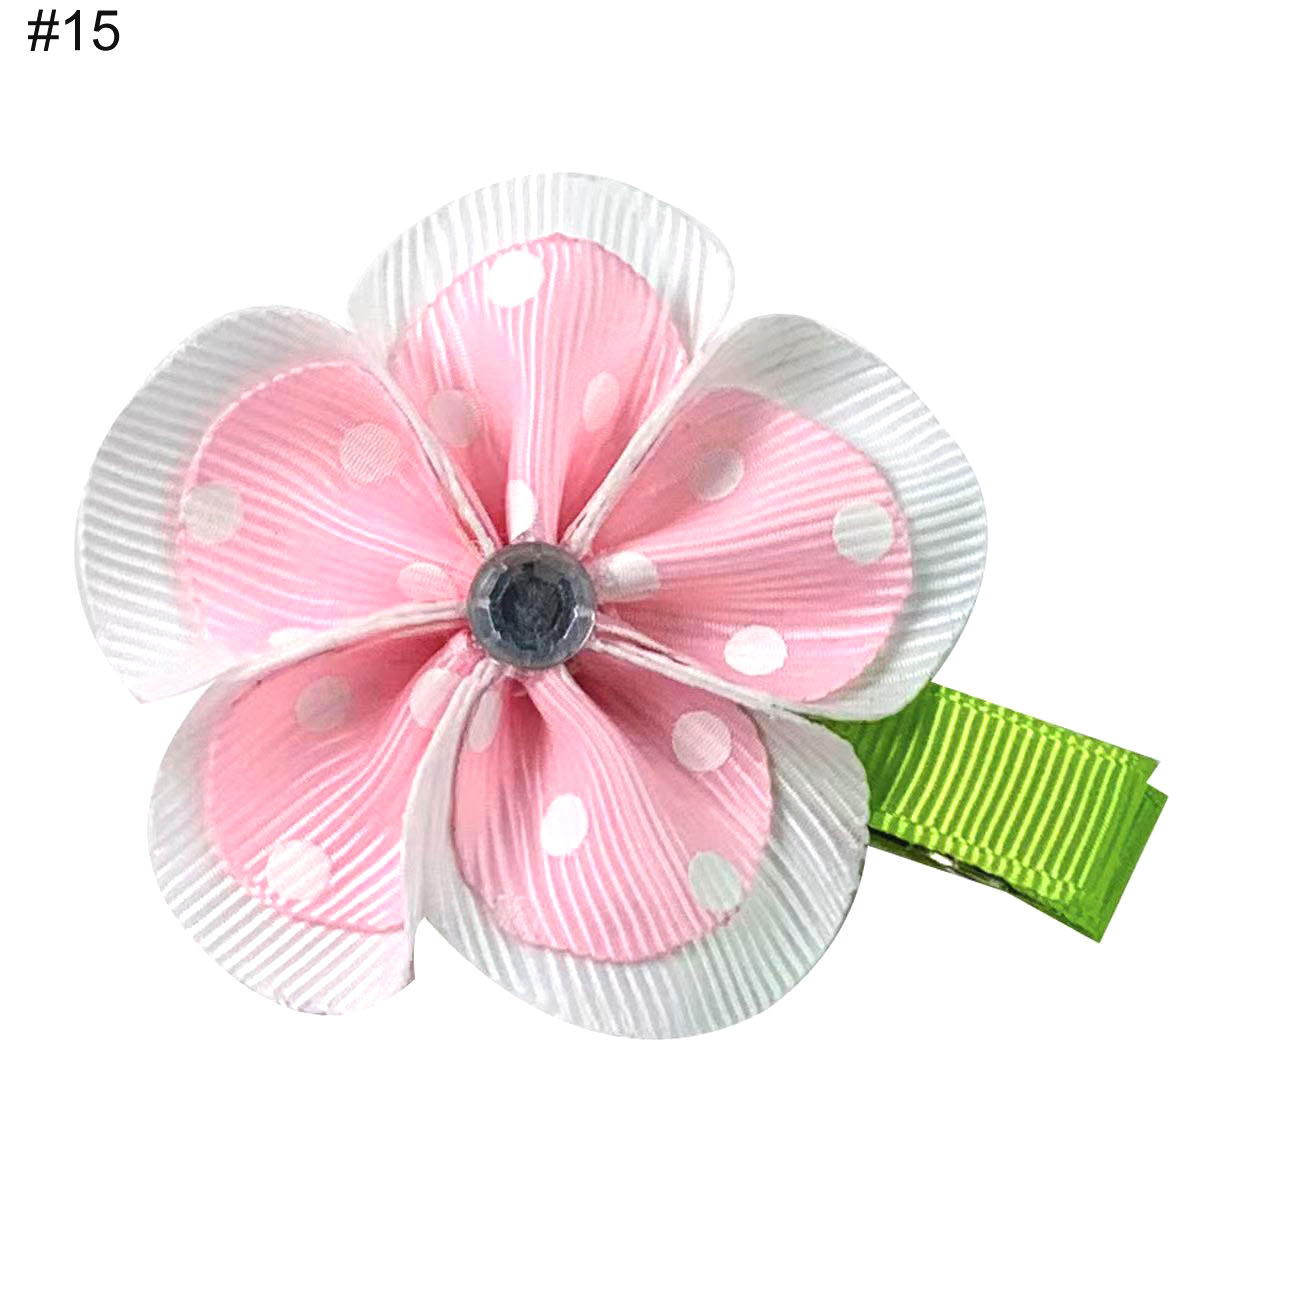 2'' double flower hair cip for girl toddle accessories sprong